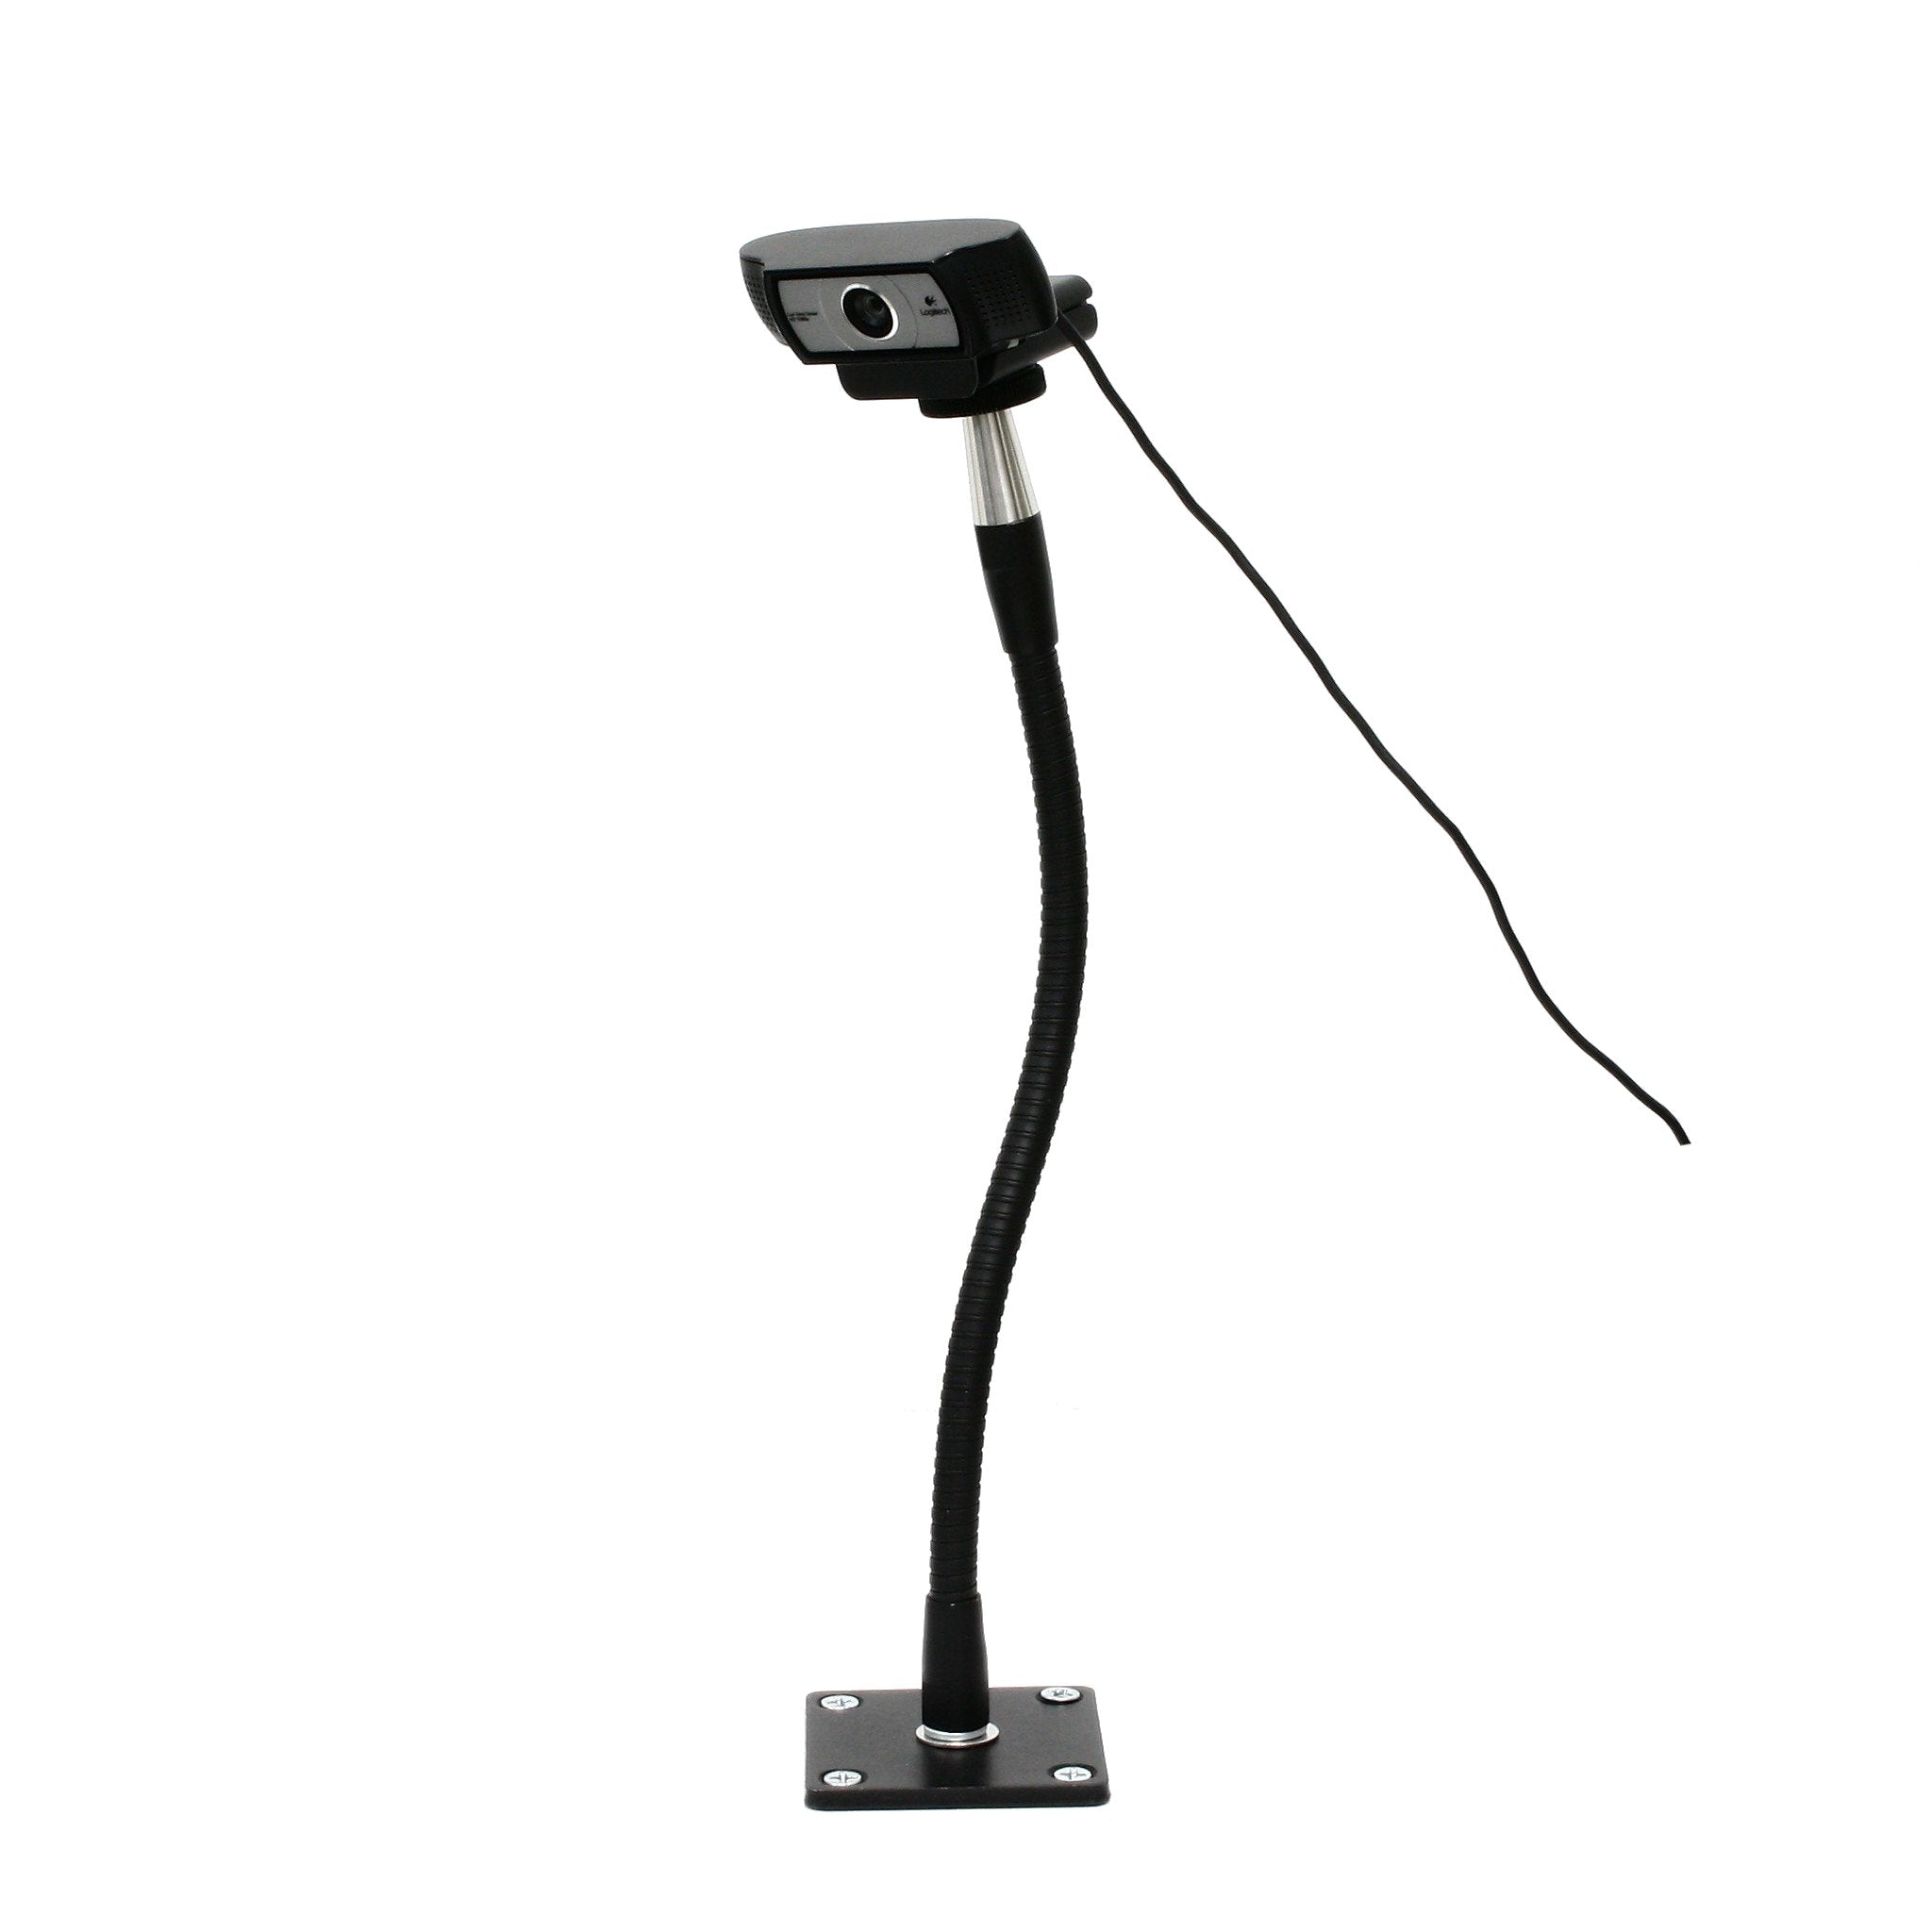 SnakeClamp 13 Flexible Arm Webcam Stand with Plate Mount